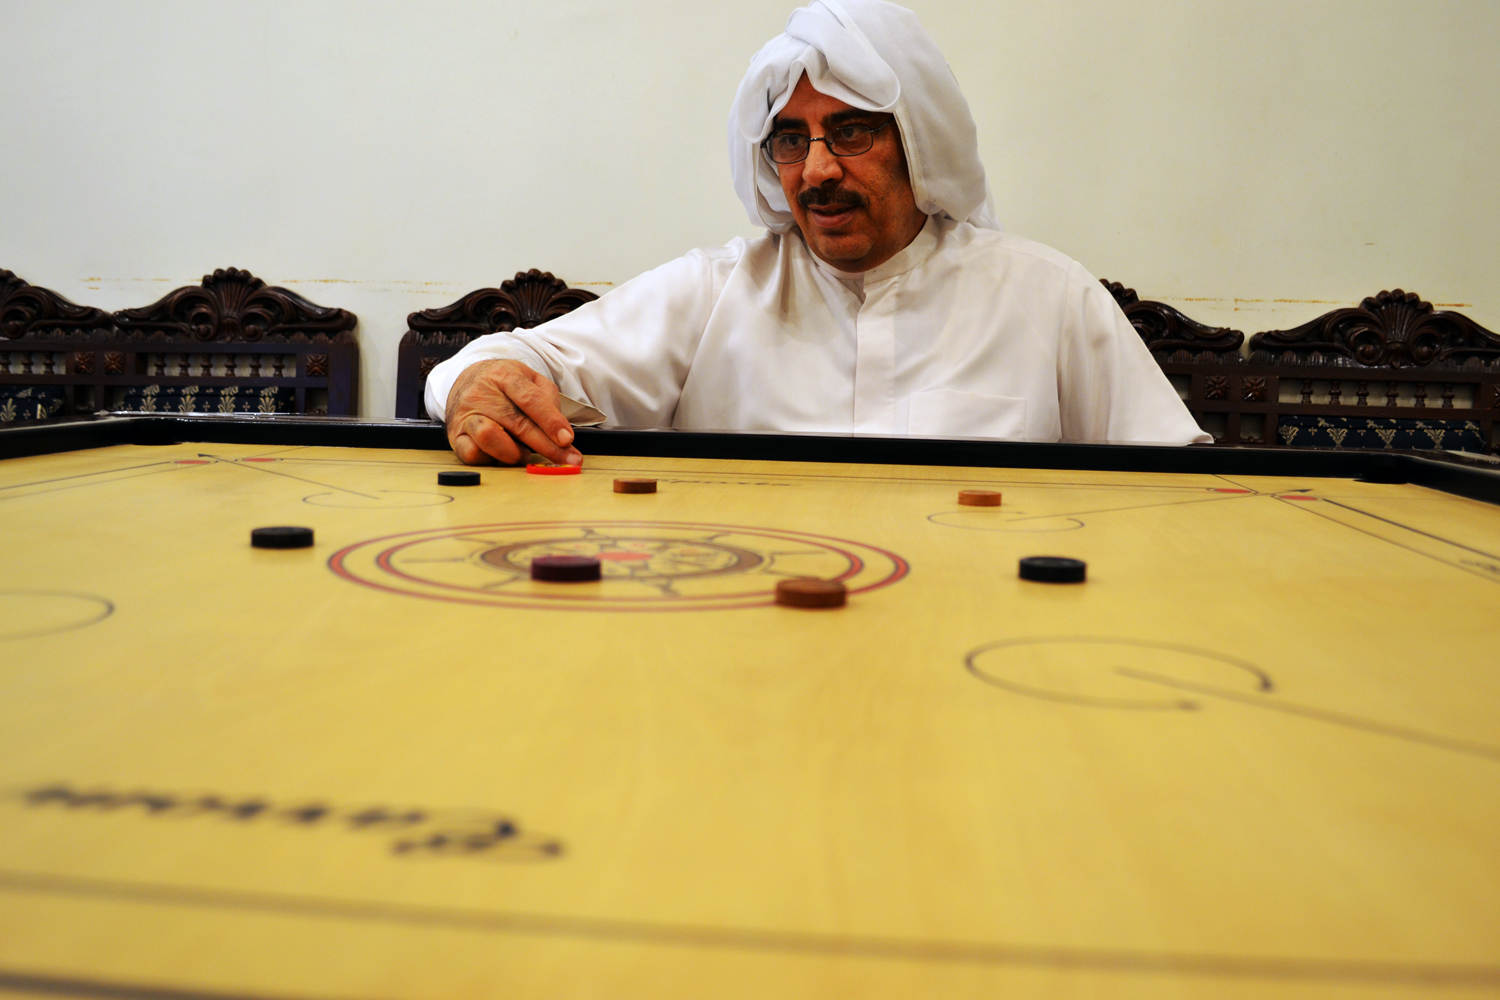 Carrom is a game consisting of a square-shaped wooden board, played similarly to billiard, and is very famous in the Gulf region